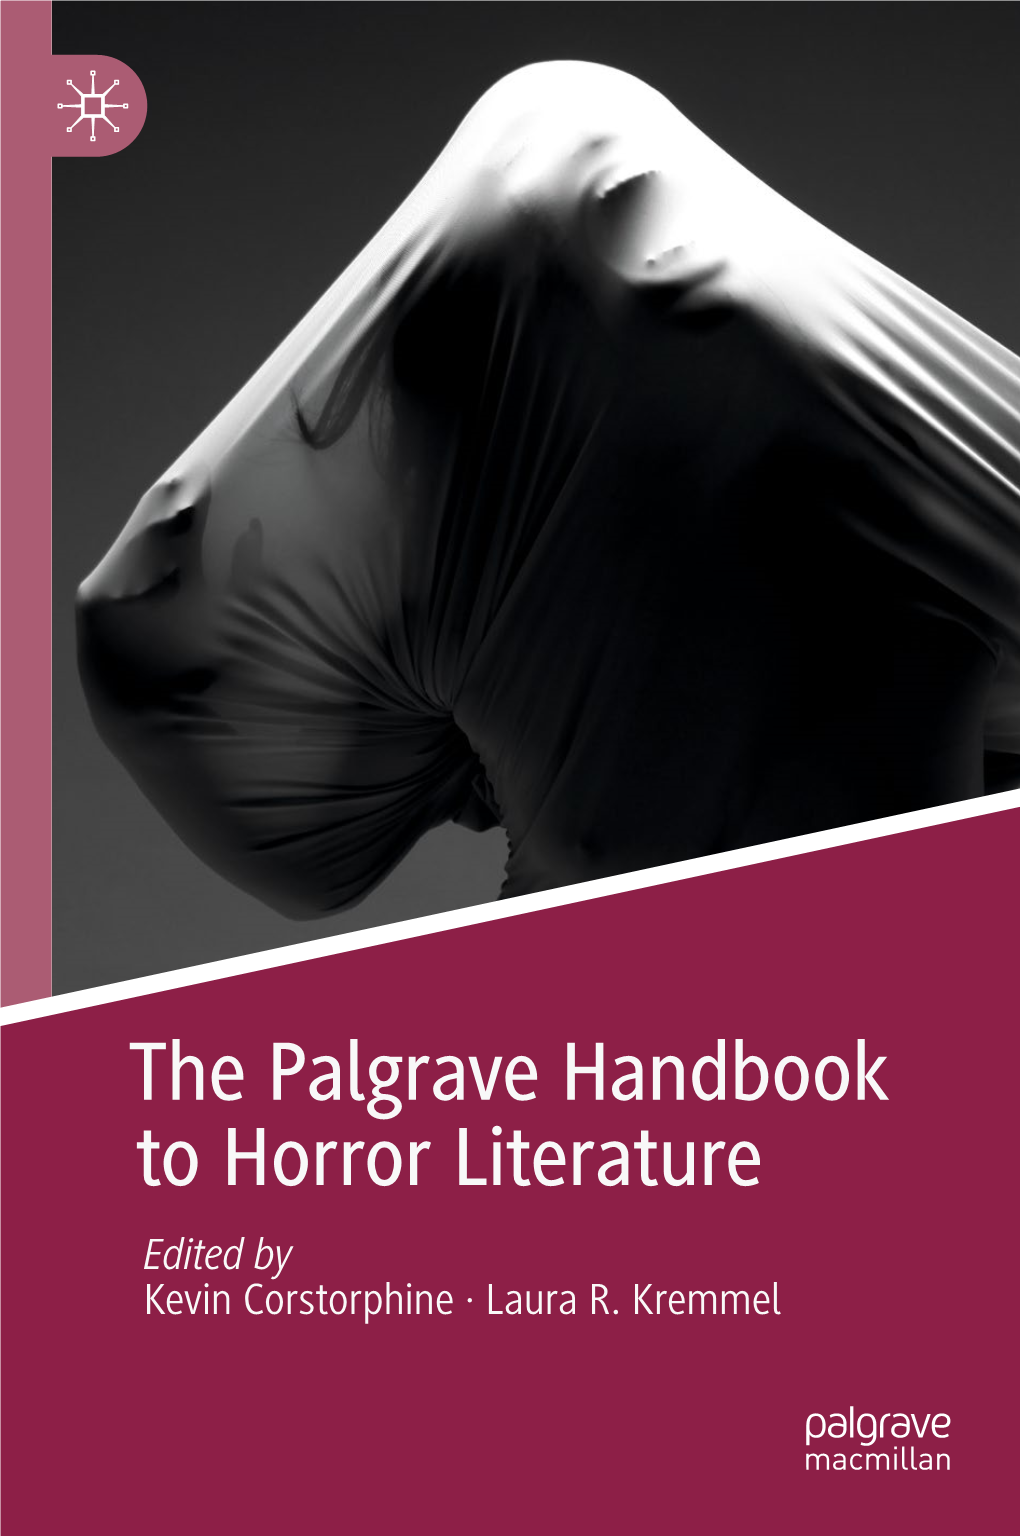 The Palgrave Handbook to Horror Literature Edited by Kevin Corstorphine · Laura R